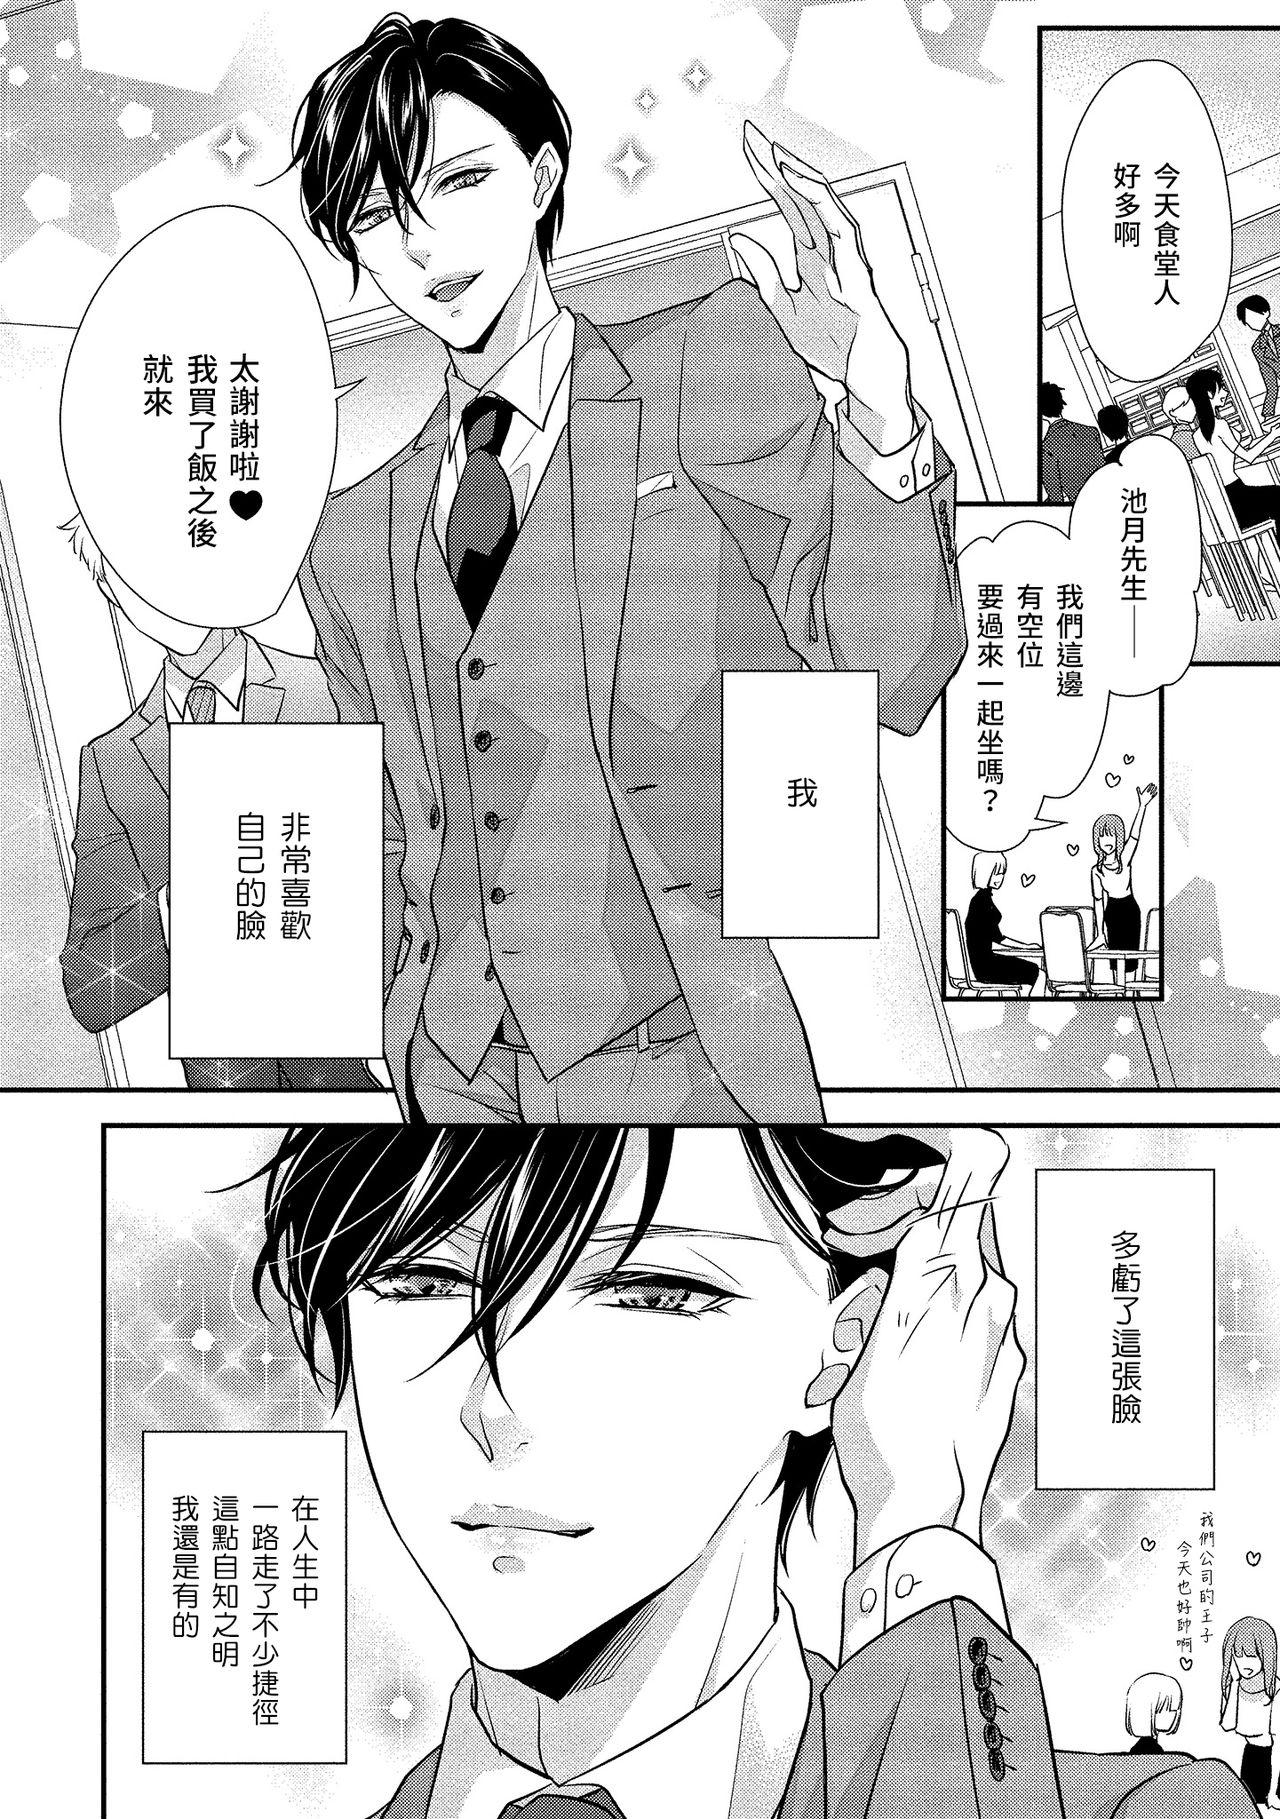 Fodendo [Aizen Mana] Is It An Invitation For Sexual Intercourse? ~Story of a Carnivorous Narcissist and an Aromantic Woman~ | 你在以做愛為前提邀請我嗎？～肉食系自戀男子與絕對不戀愛的女子～ Ch.1-6 end [Chinese] [莉赛特汉化组] Huge Cock - Page 6